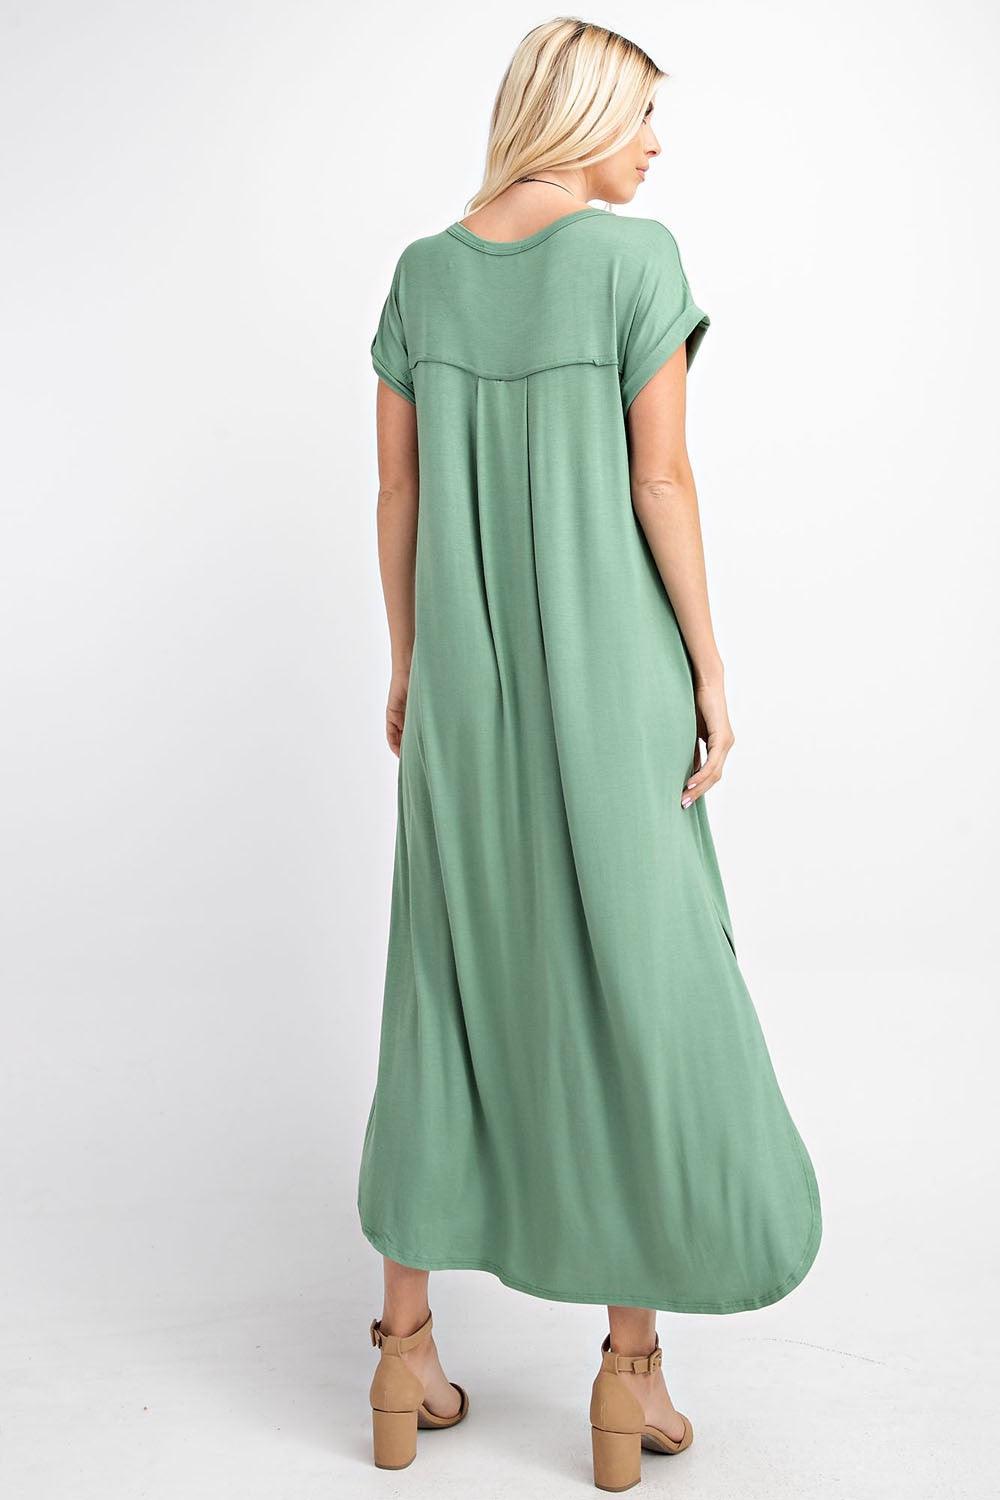 Butter Soft Maxi - Lady Dorothy Boutique